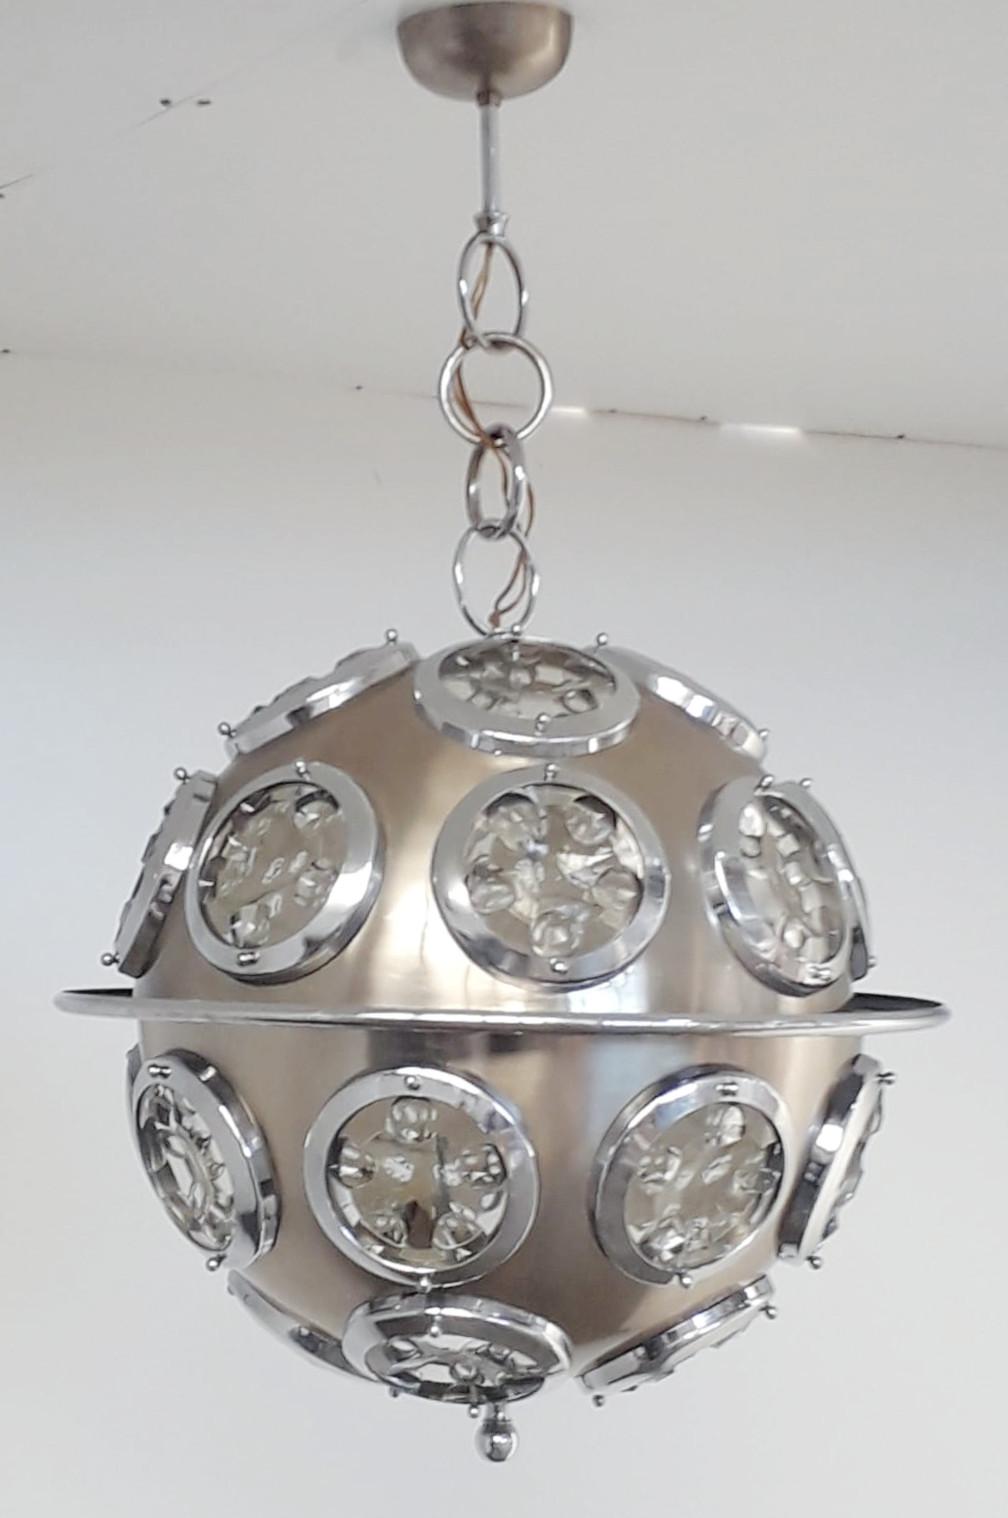 Vintage Italian chandelier with brushed steel circular structure and optical beveled glass lenses / Designed by Oscar Torlasco for Lumi circa 1960s / Made in Italy
6 lights / E12 or E14 type / max 40W each
Measures: Diameter: 19.5 inches / total